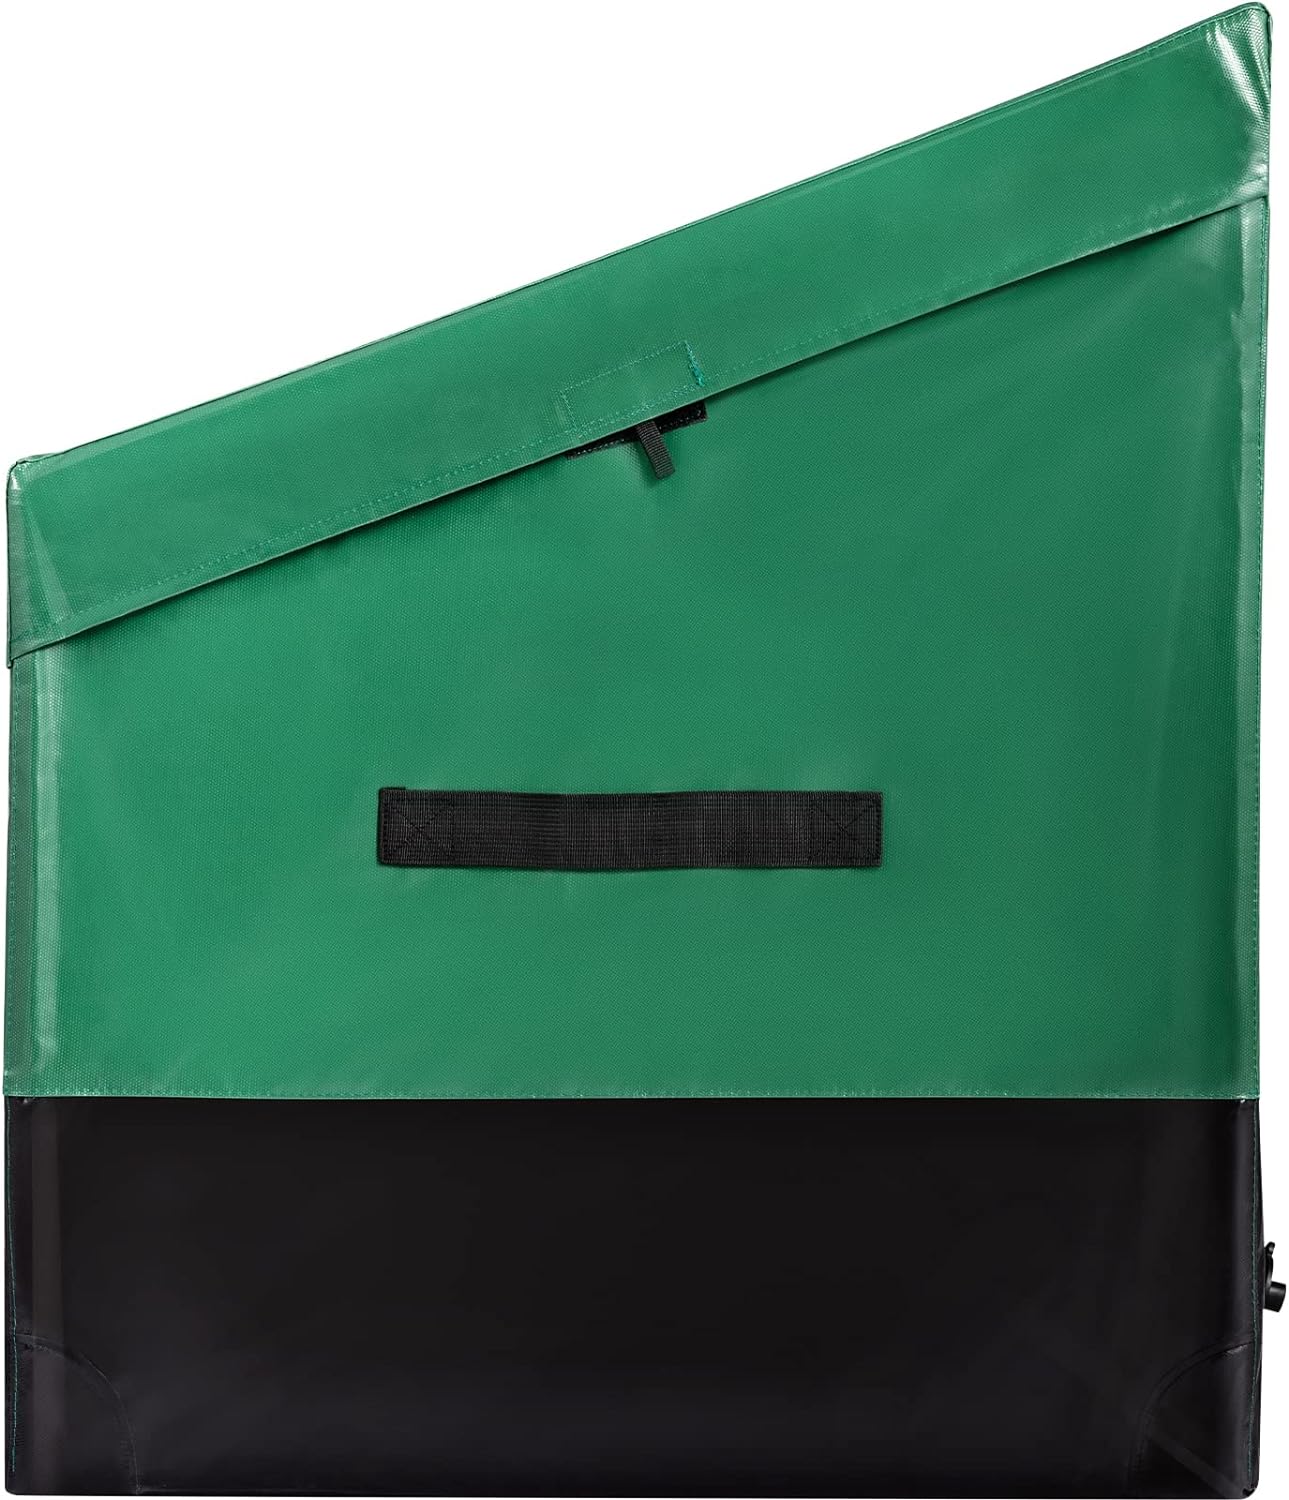 VEVOR Outdoor Storage Box, 150 Gallon Waterproof PE Tarpaulin Deck Box w\/Galvanized Frame, All-Weather Protection & Portable, for Camping, Garden, Poolside, and Yard, Black & Green